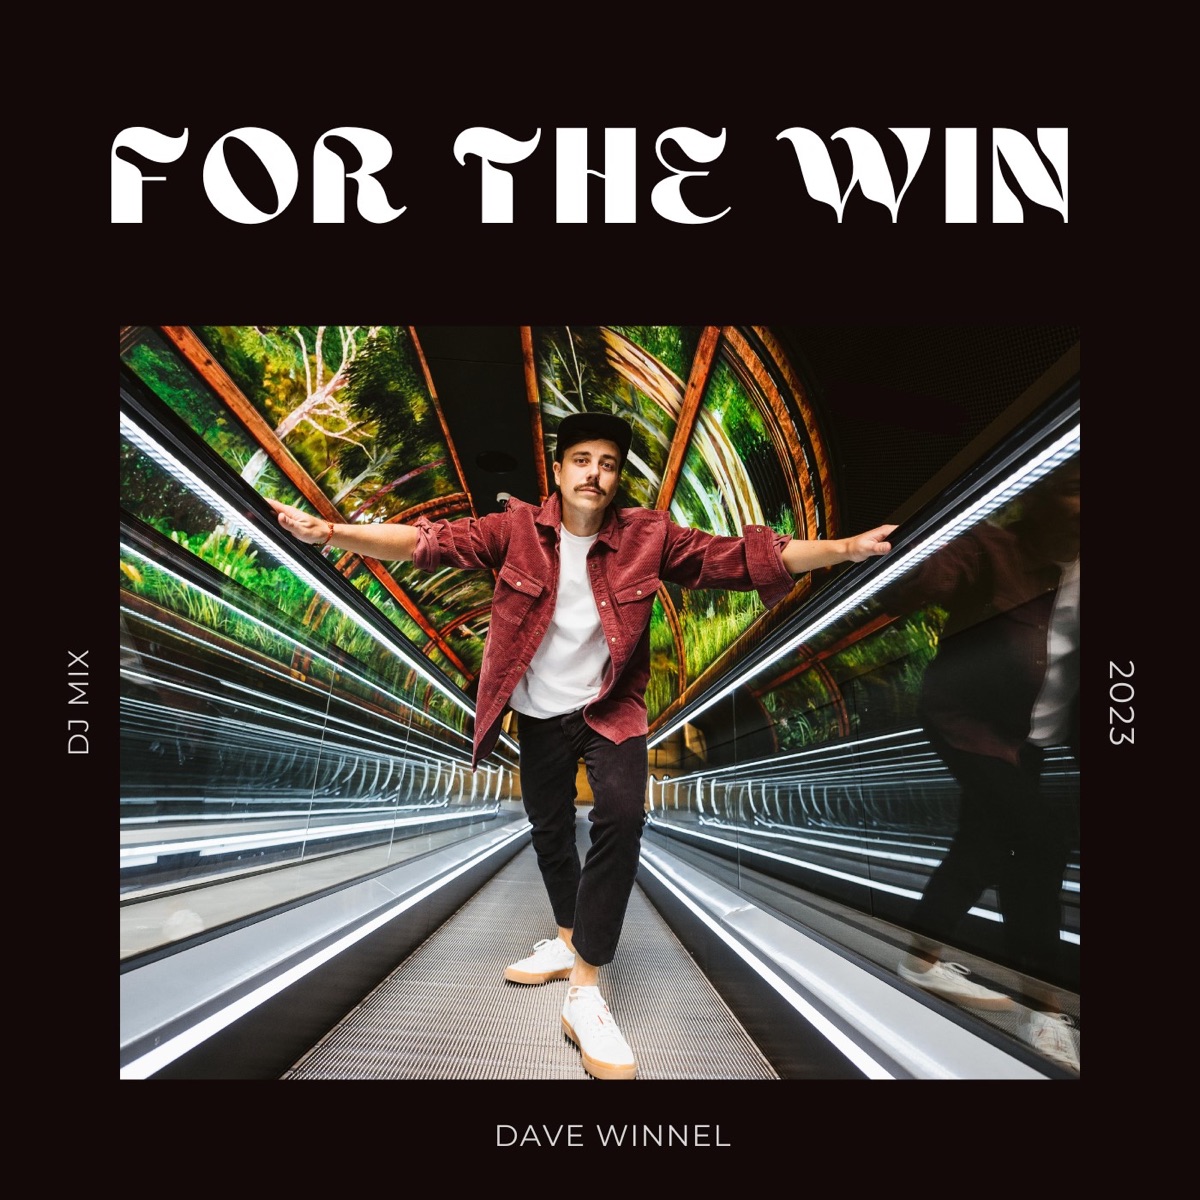 For The Win (DJ Mix) - Album by Dave Winnel - Apple Music